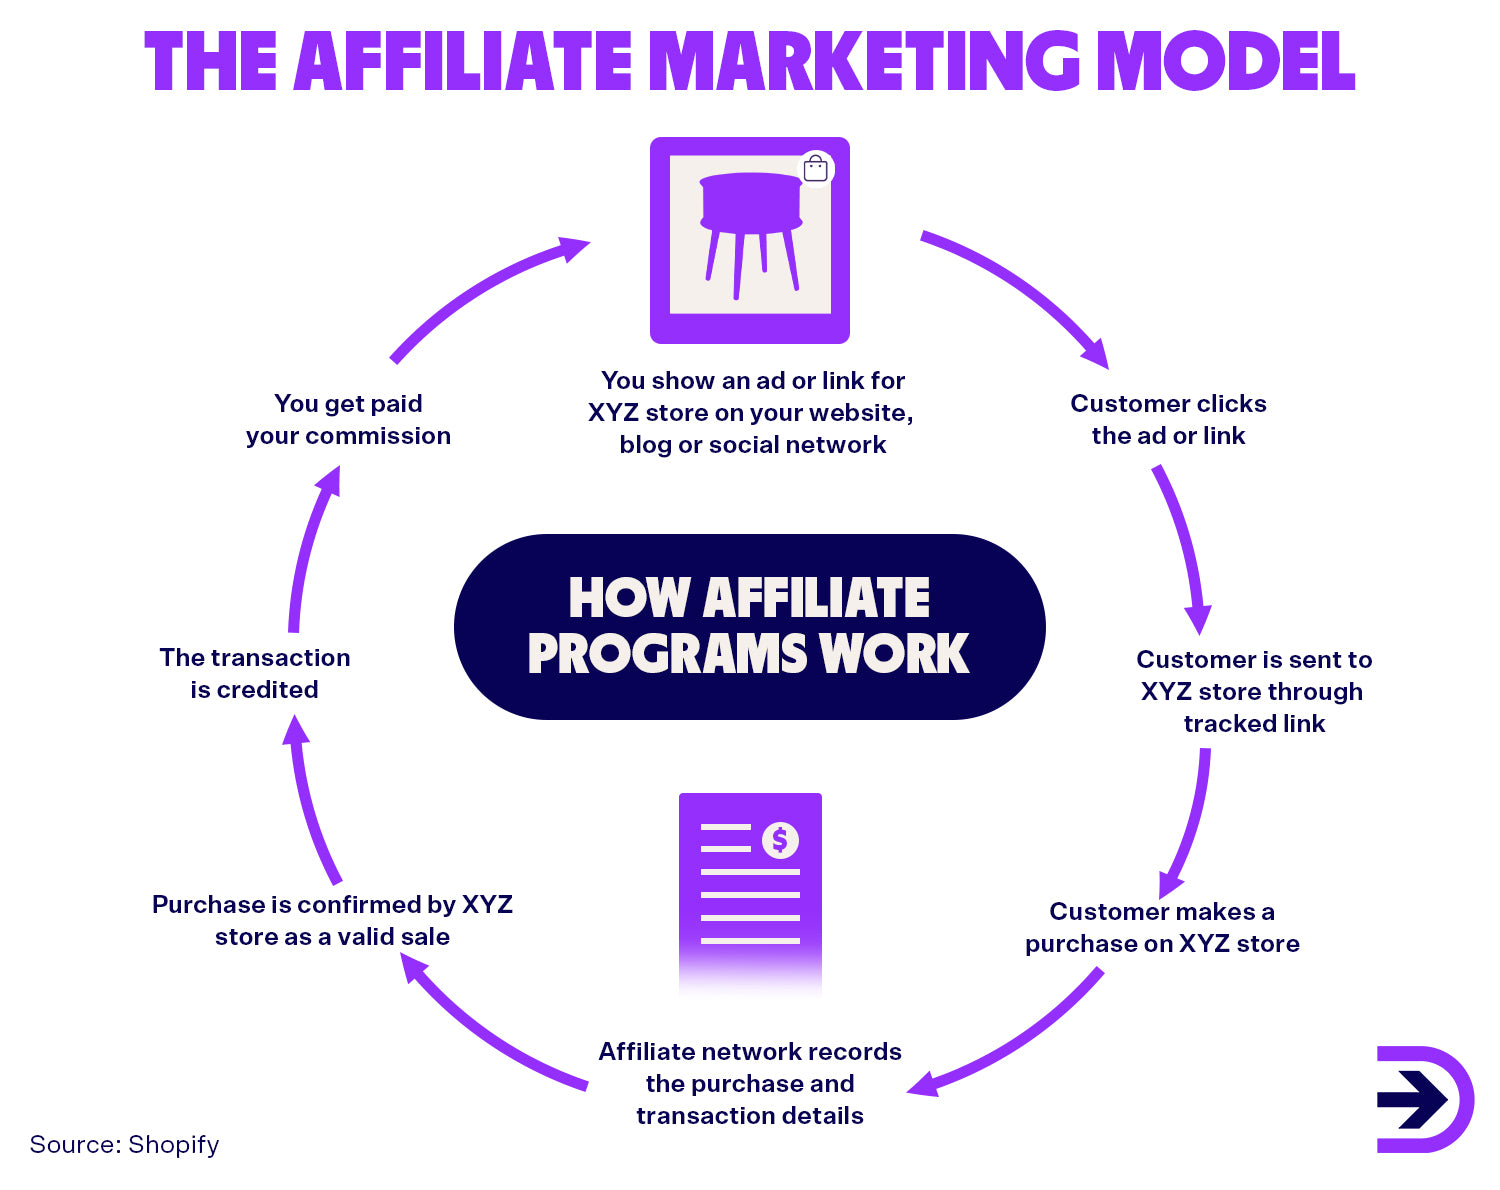 The more people you can influence to click on and purchase through affiliate links, the more cash you can make.